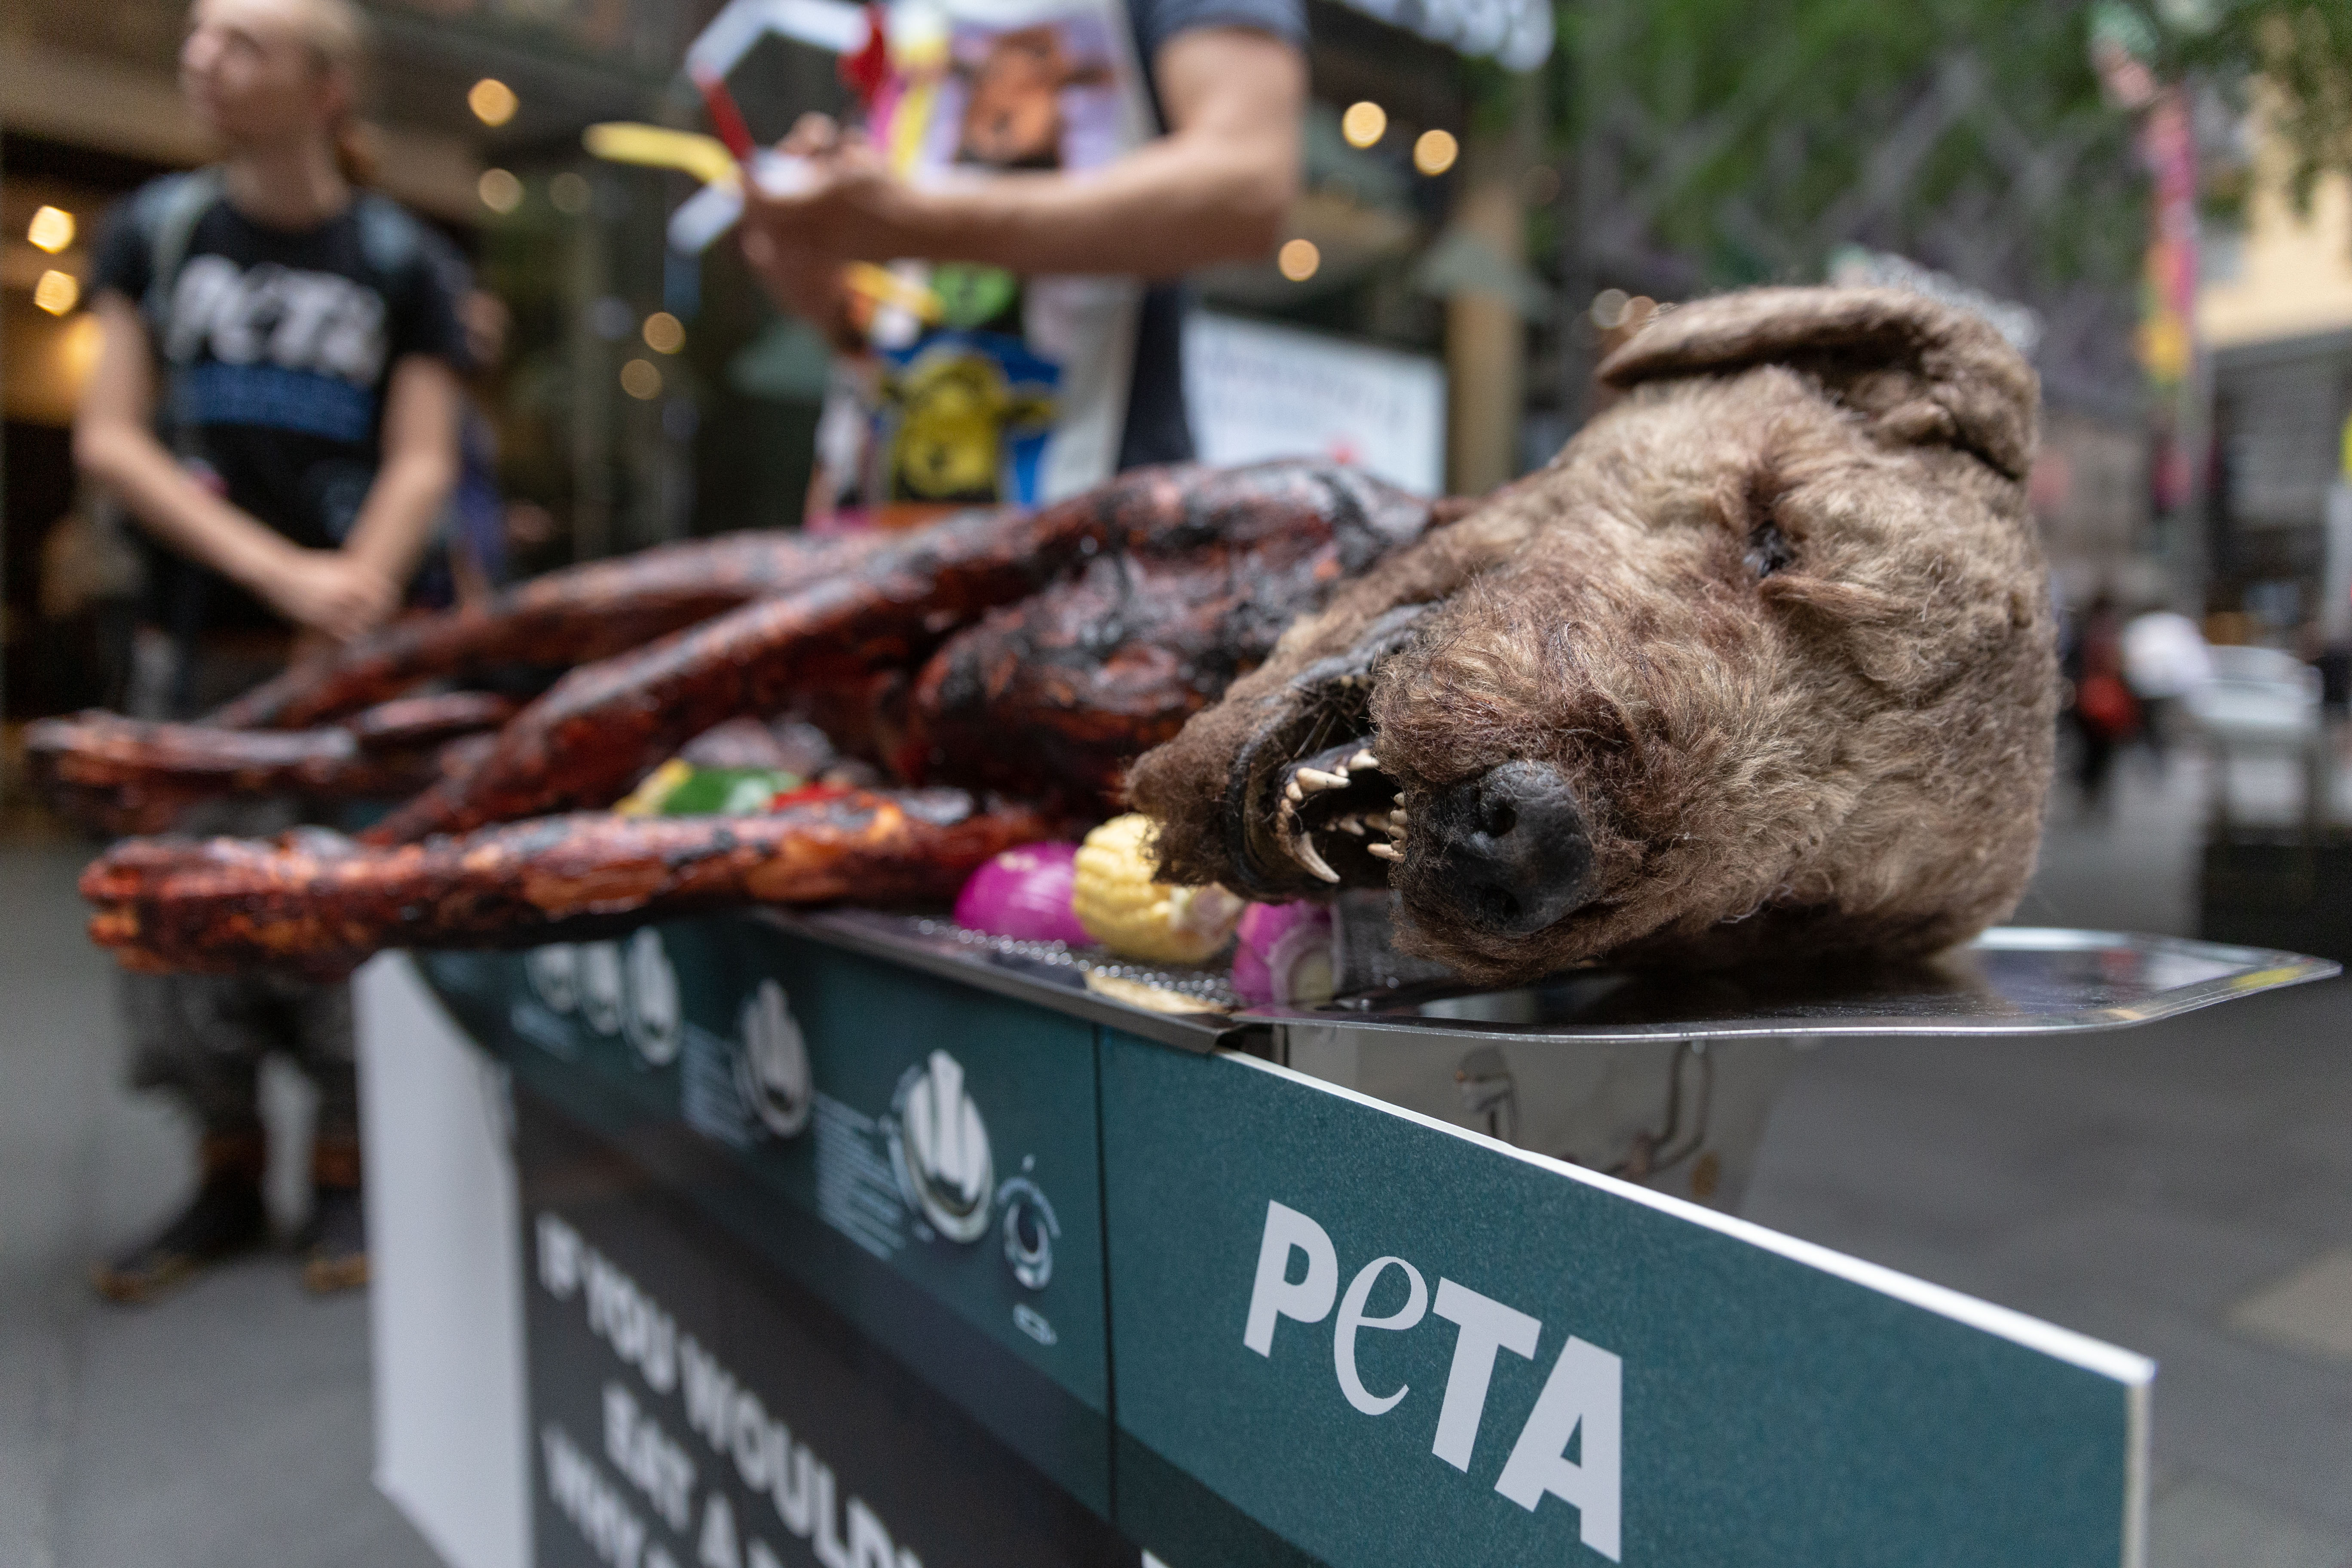 PETA Barbecues a ‘Dog’ in a Sydney Shopping Mall